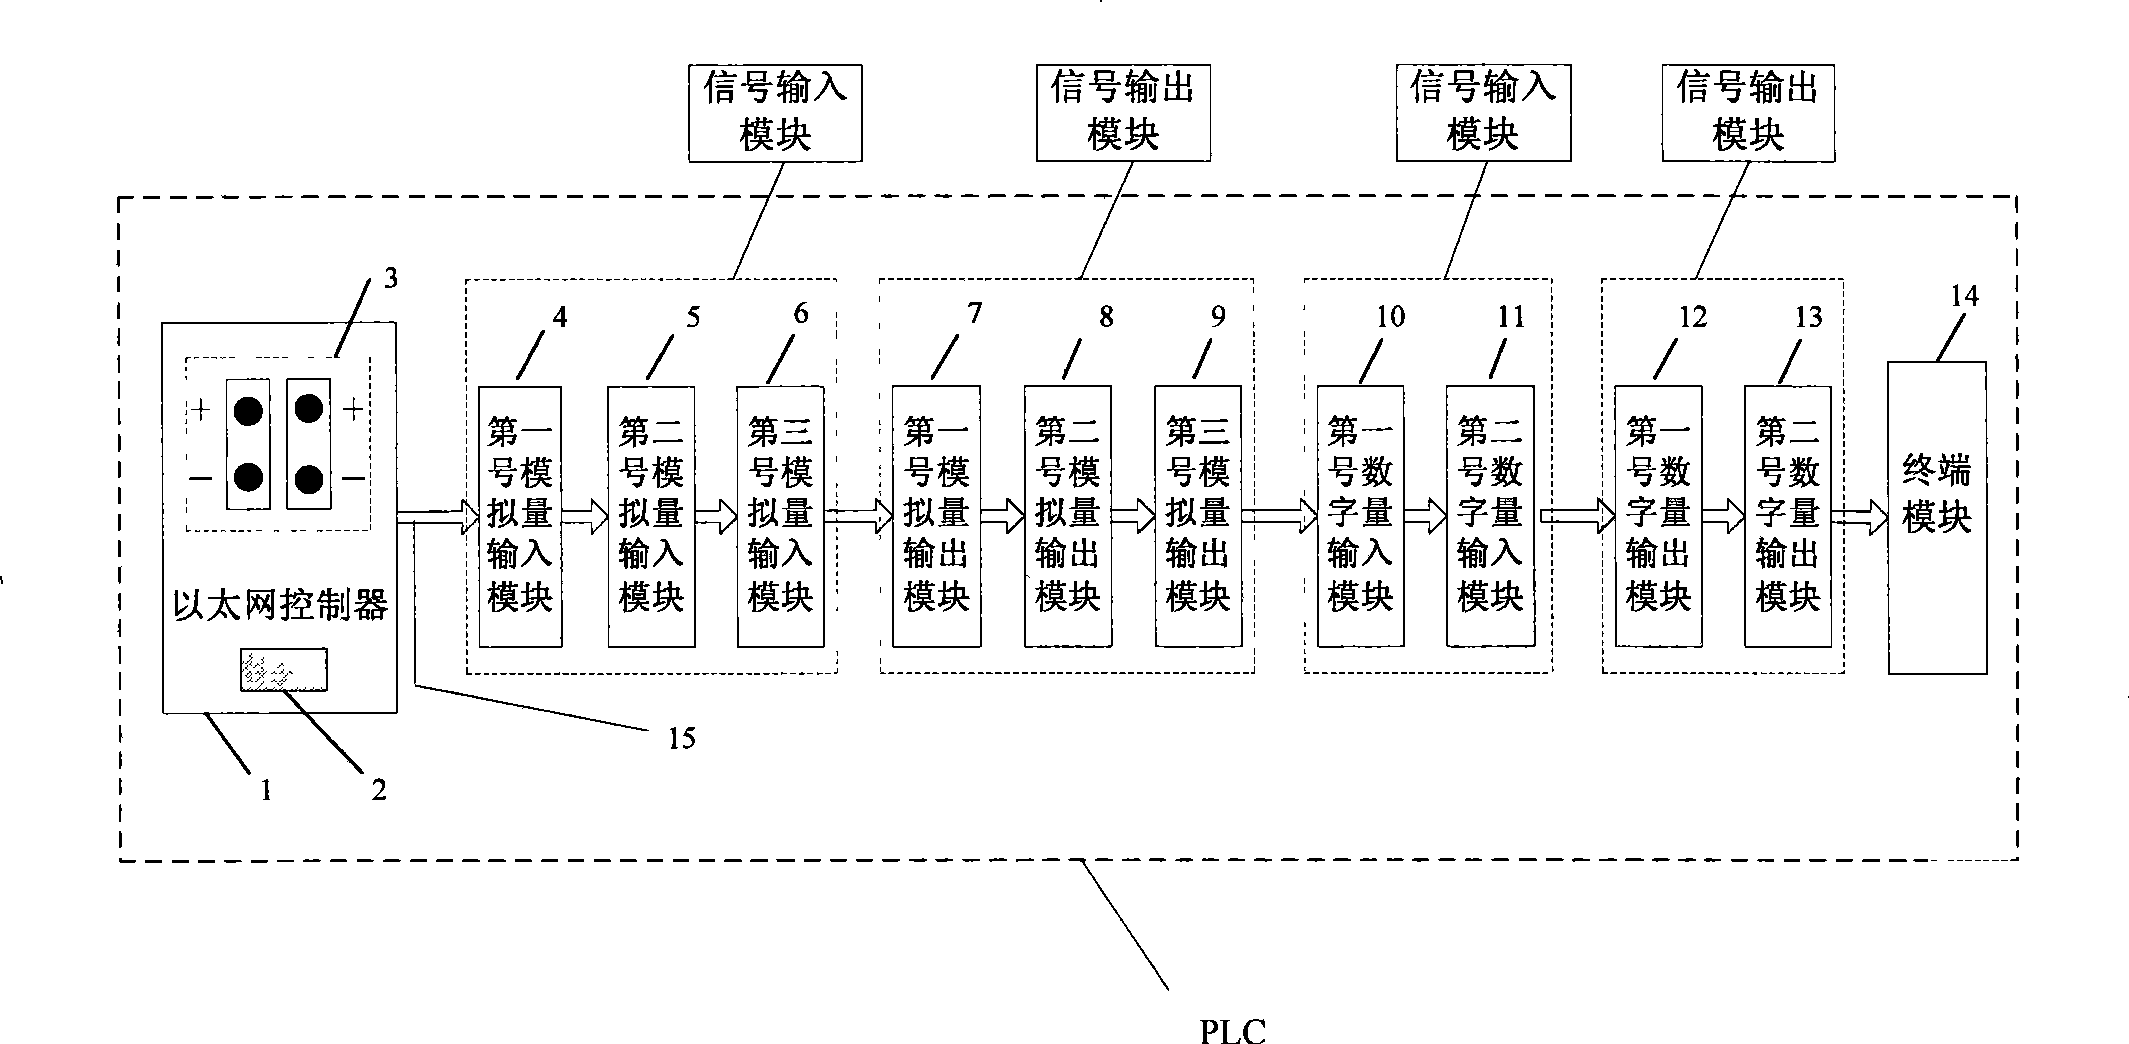 Ethernet network data acquisition and transmission method and system